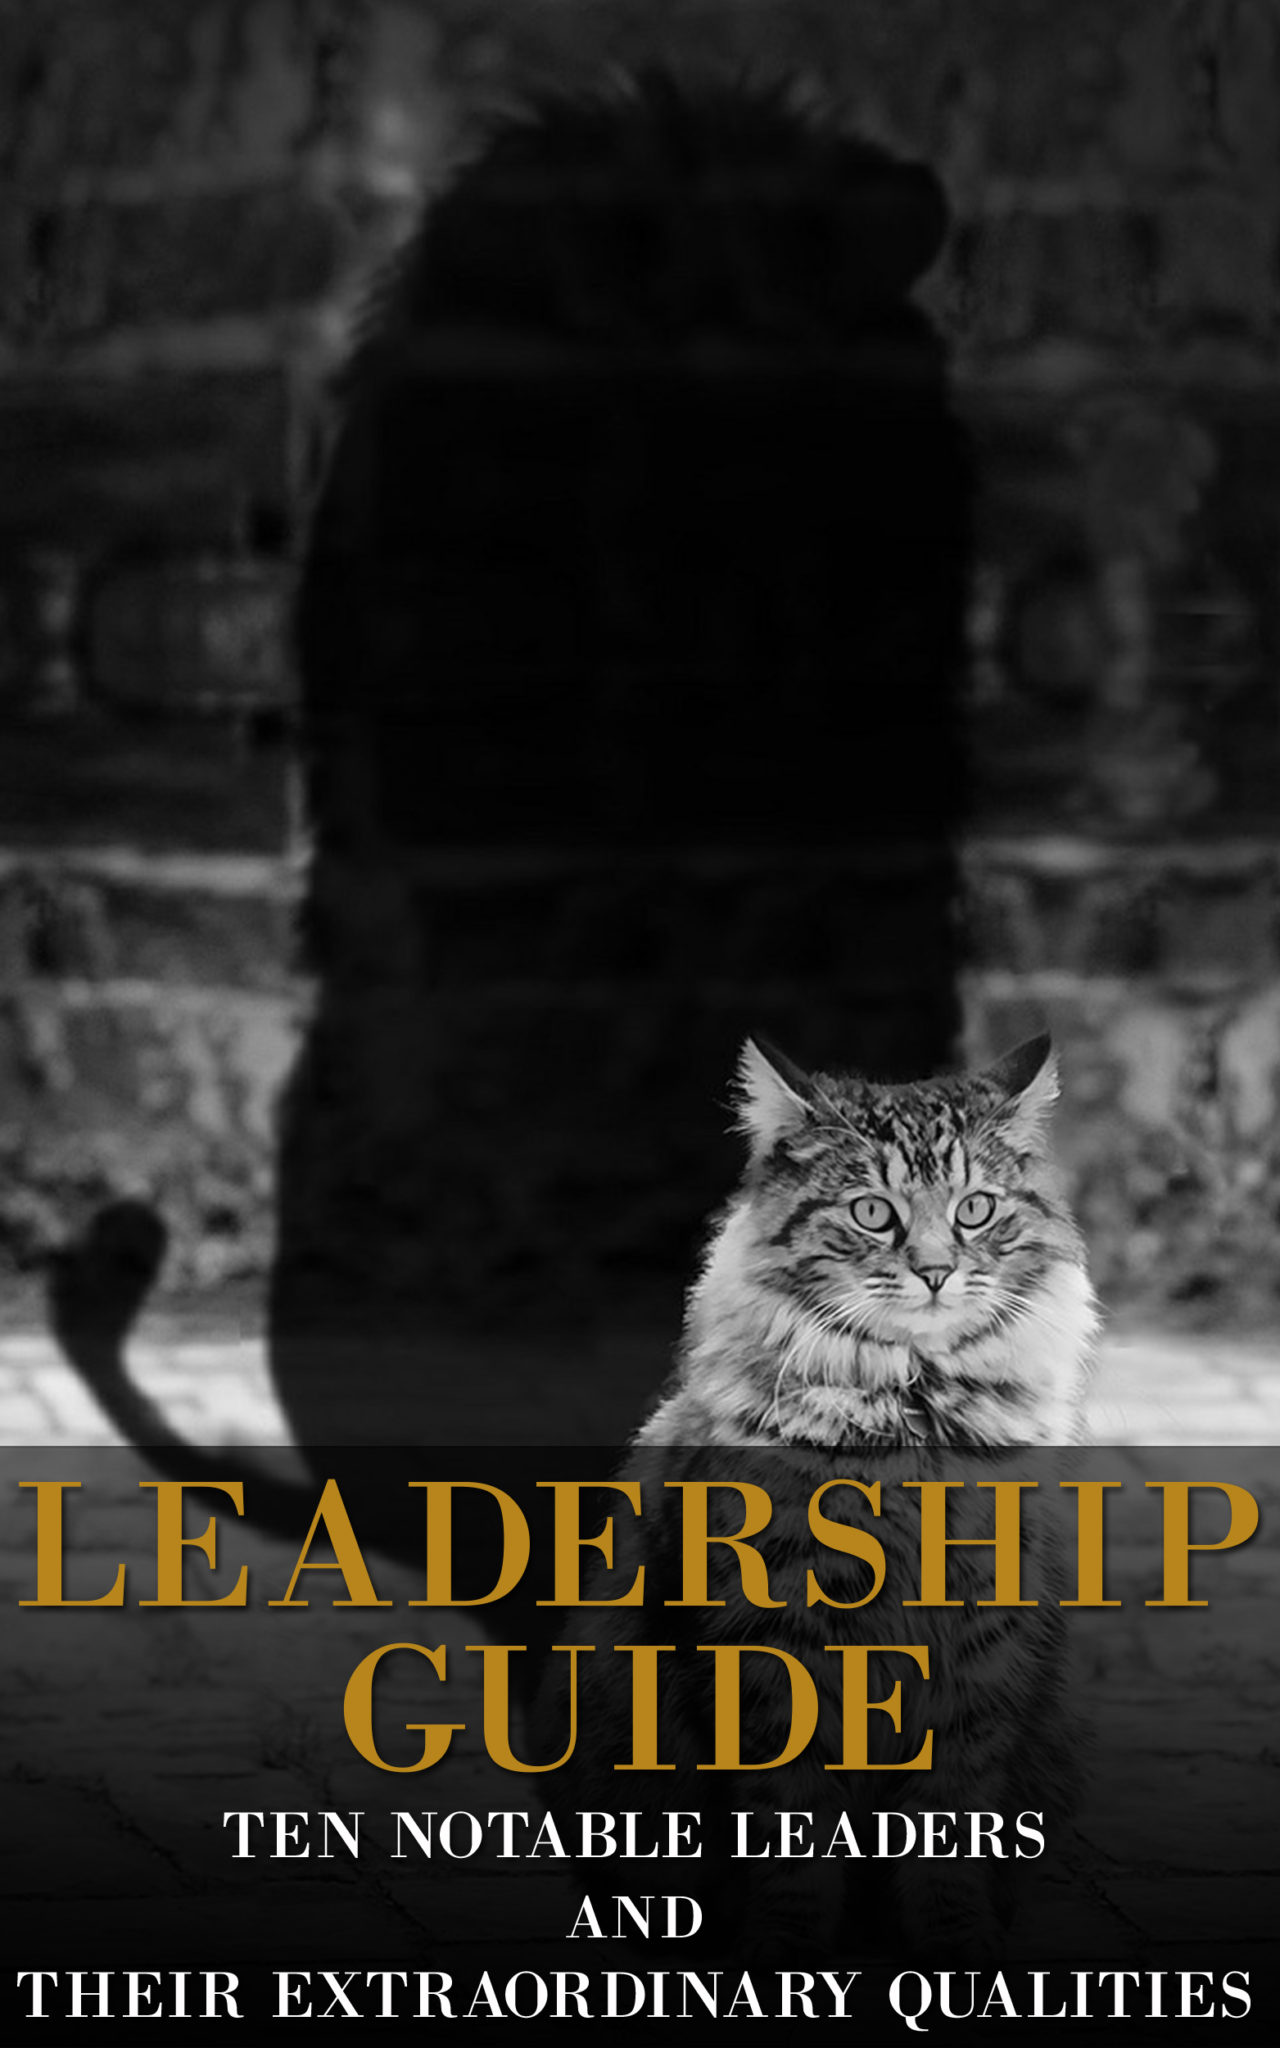 Leadership Guide – Ten Notable Leaders and Their Extraordinary Qualities(Learn from Abraham Lincoln, Martin Luther King and Mahatma Ghandi, Leadership, leaders, lead) by Daniel Webb